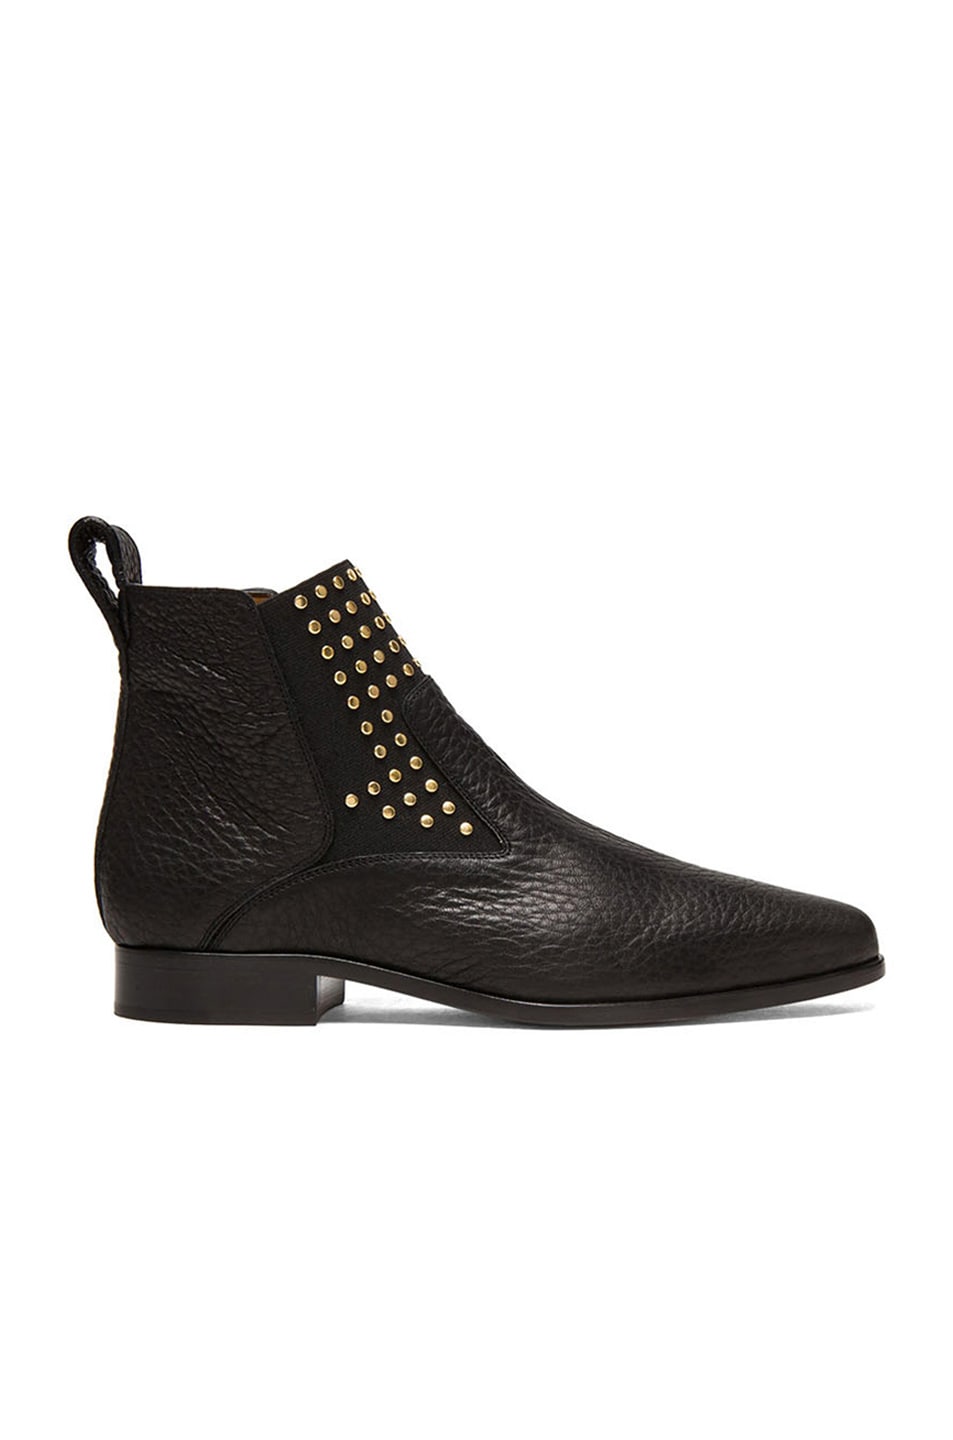 Image 1 of Chloe Studded Leather Boots in Black